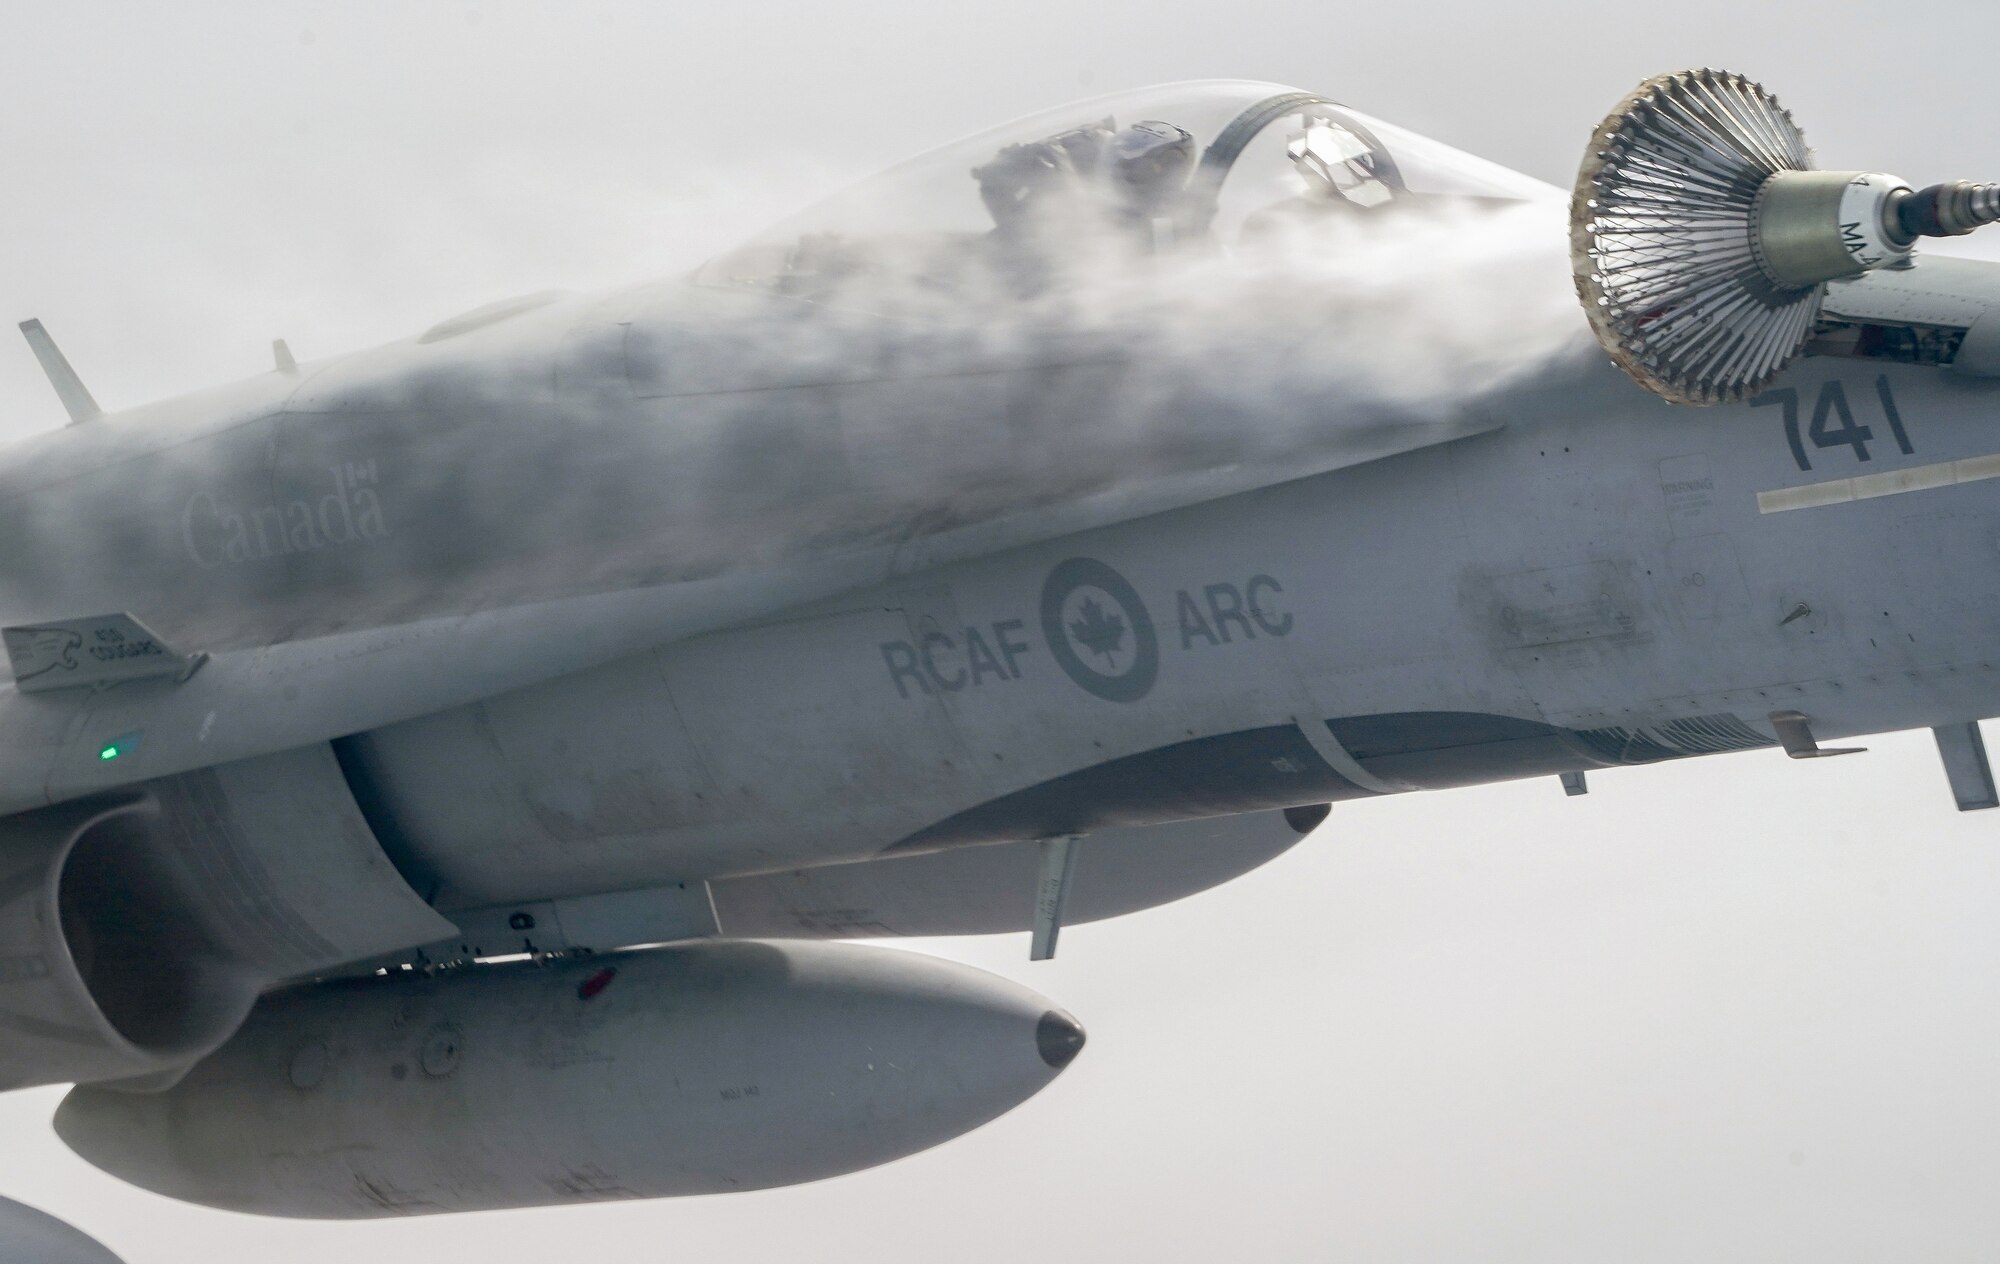 A Royal Canadian Air Force CF-18 Hornet makes initial contact with a CC-150 Polaris refueling tanker nozzle as RCAF Airmen assigned to the 437th Transport Squadron based out of Canadian Forces Base Trenton, Canada, perform refueling operations in training airspace over Alaska during the Red Flag-Alaska 19-3 exercise, Aug. 15, 2019. Red Flag-Alaska, a series of Pacific Air Forces commander-directed field training exercises for U.S. forces, provides joint offensive counter-air, interdiction, close air support, and large force employment training in a simulated combat environment.